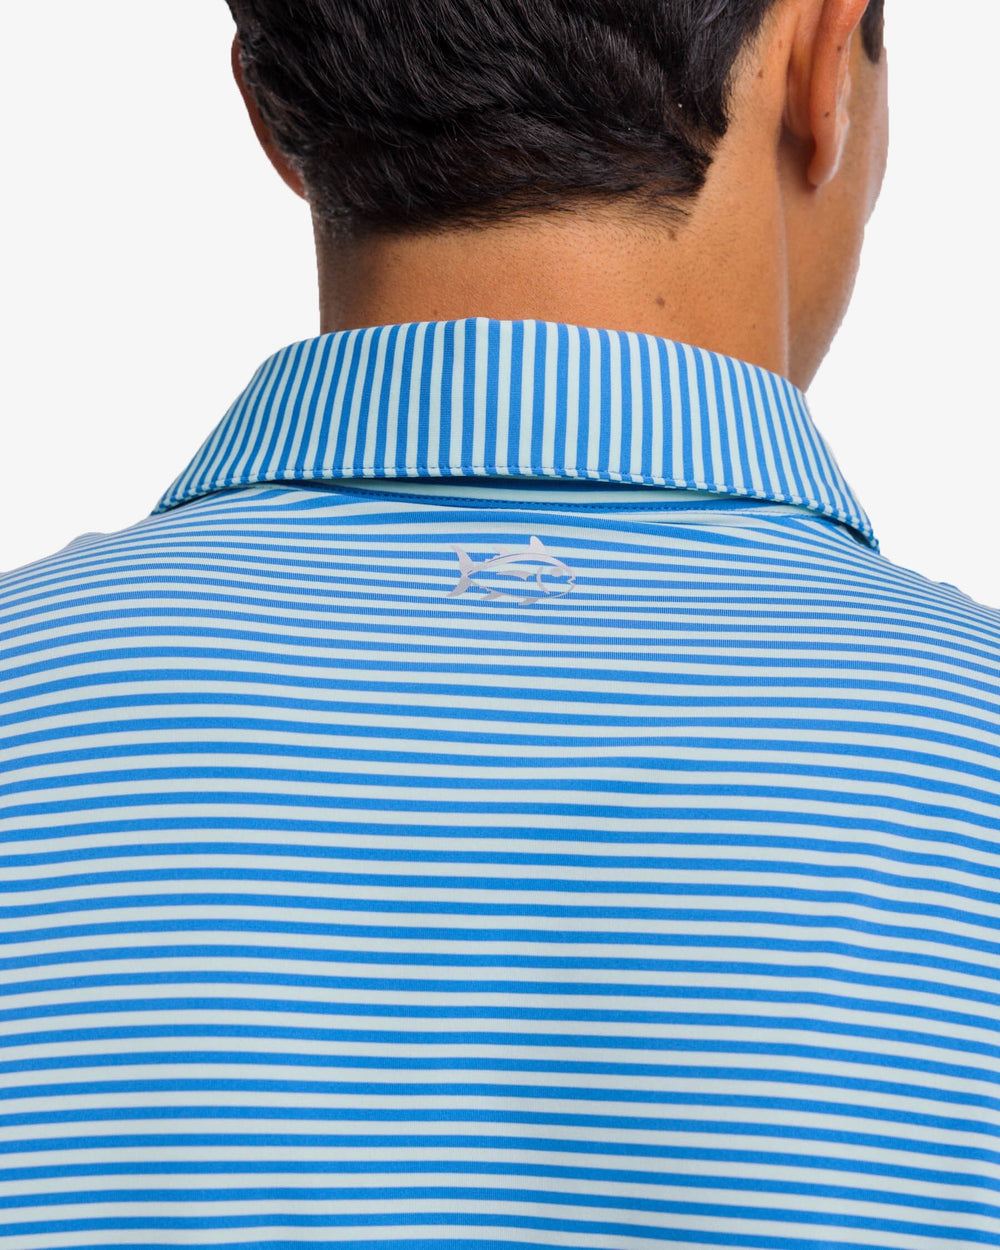 The yoke view of the Southern Tide Shores Stripe brrr eeze Performance Polo Shirt by Southern Tide - Baltic Teal